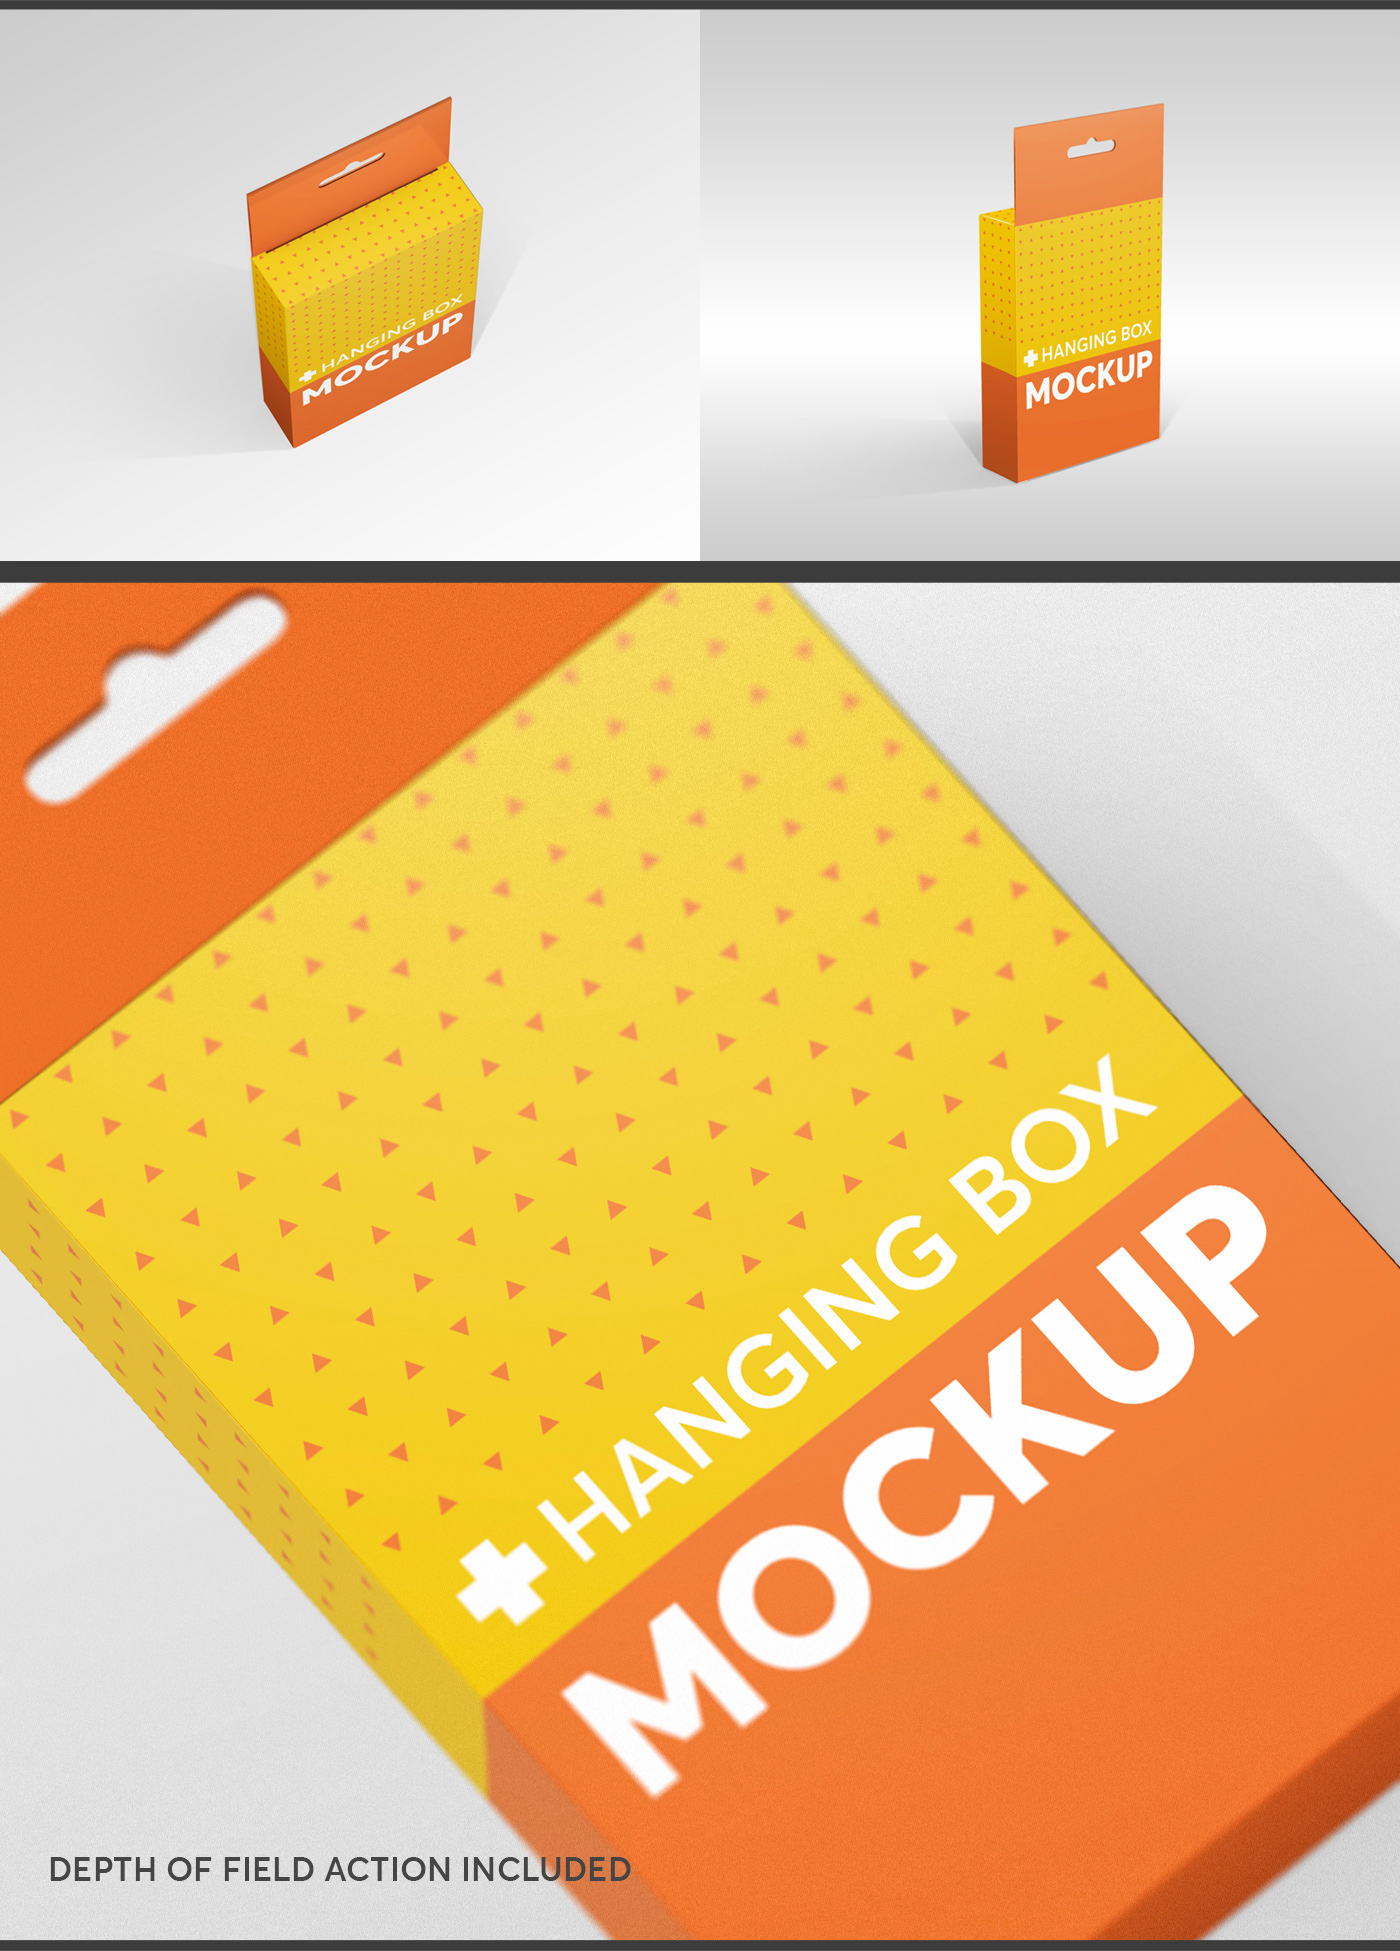 Mockup box hanger hanging Packaging 3D photorealistic psd photoshop free